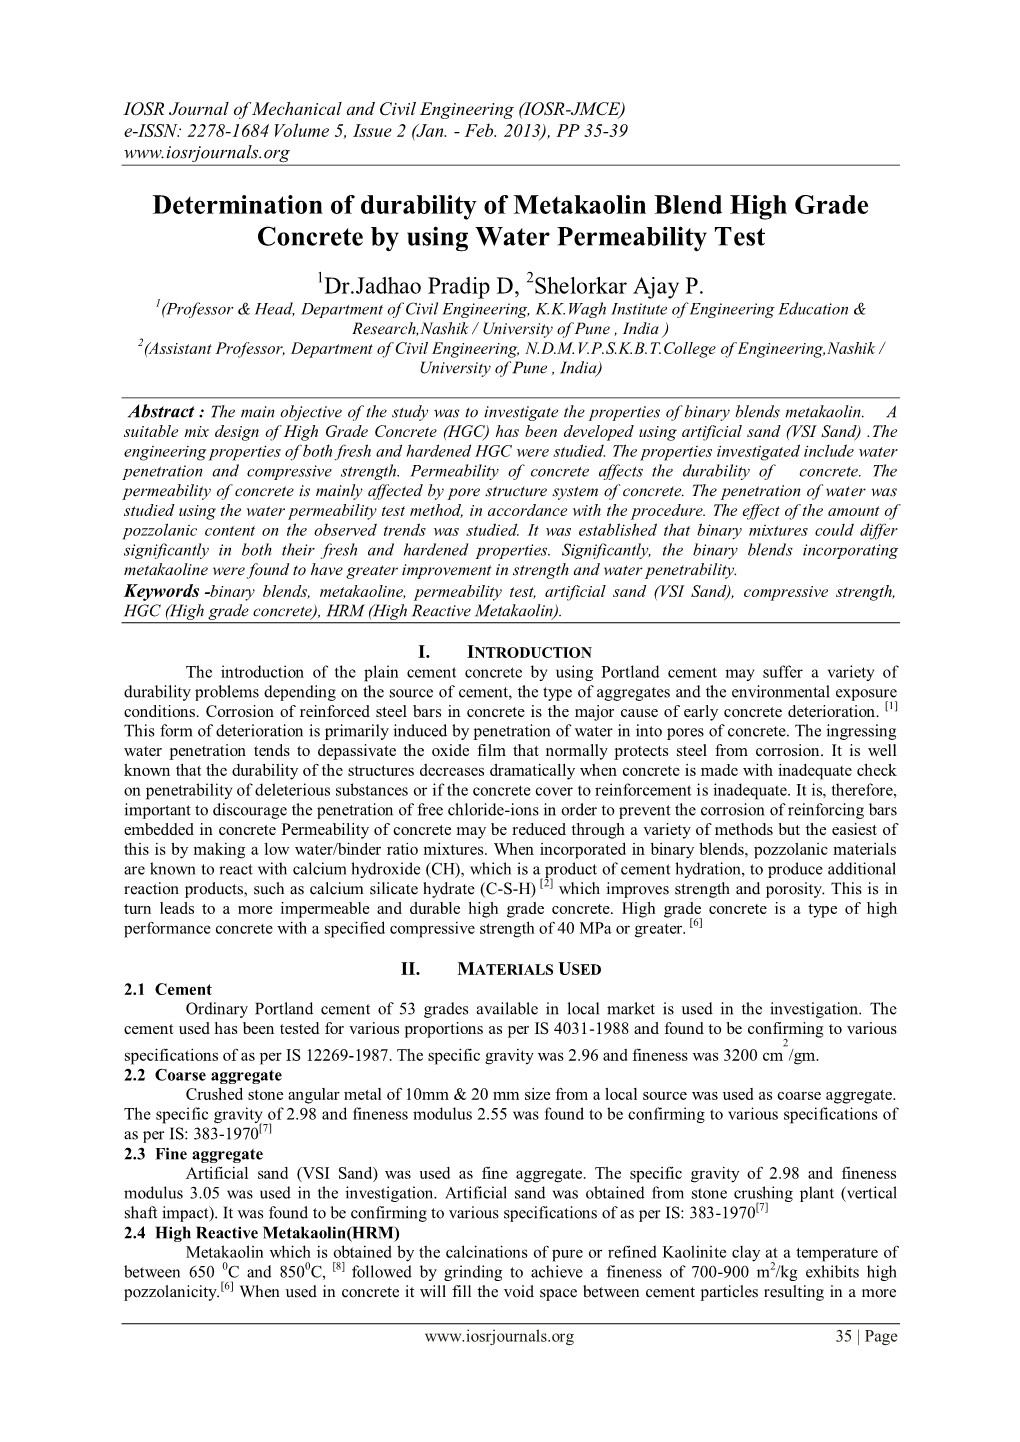 Determination of Durability of Metakaolin Blend High Grade Concrete by Using Water Permeability Test